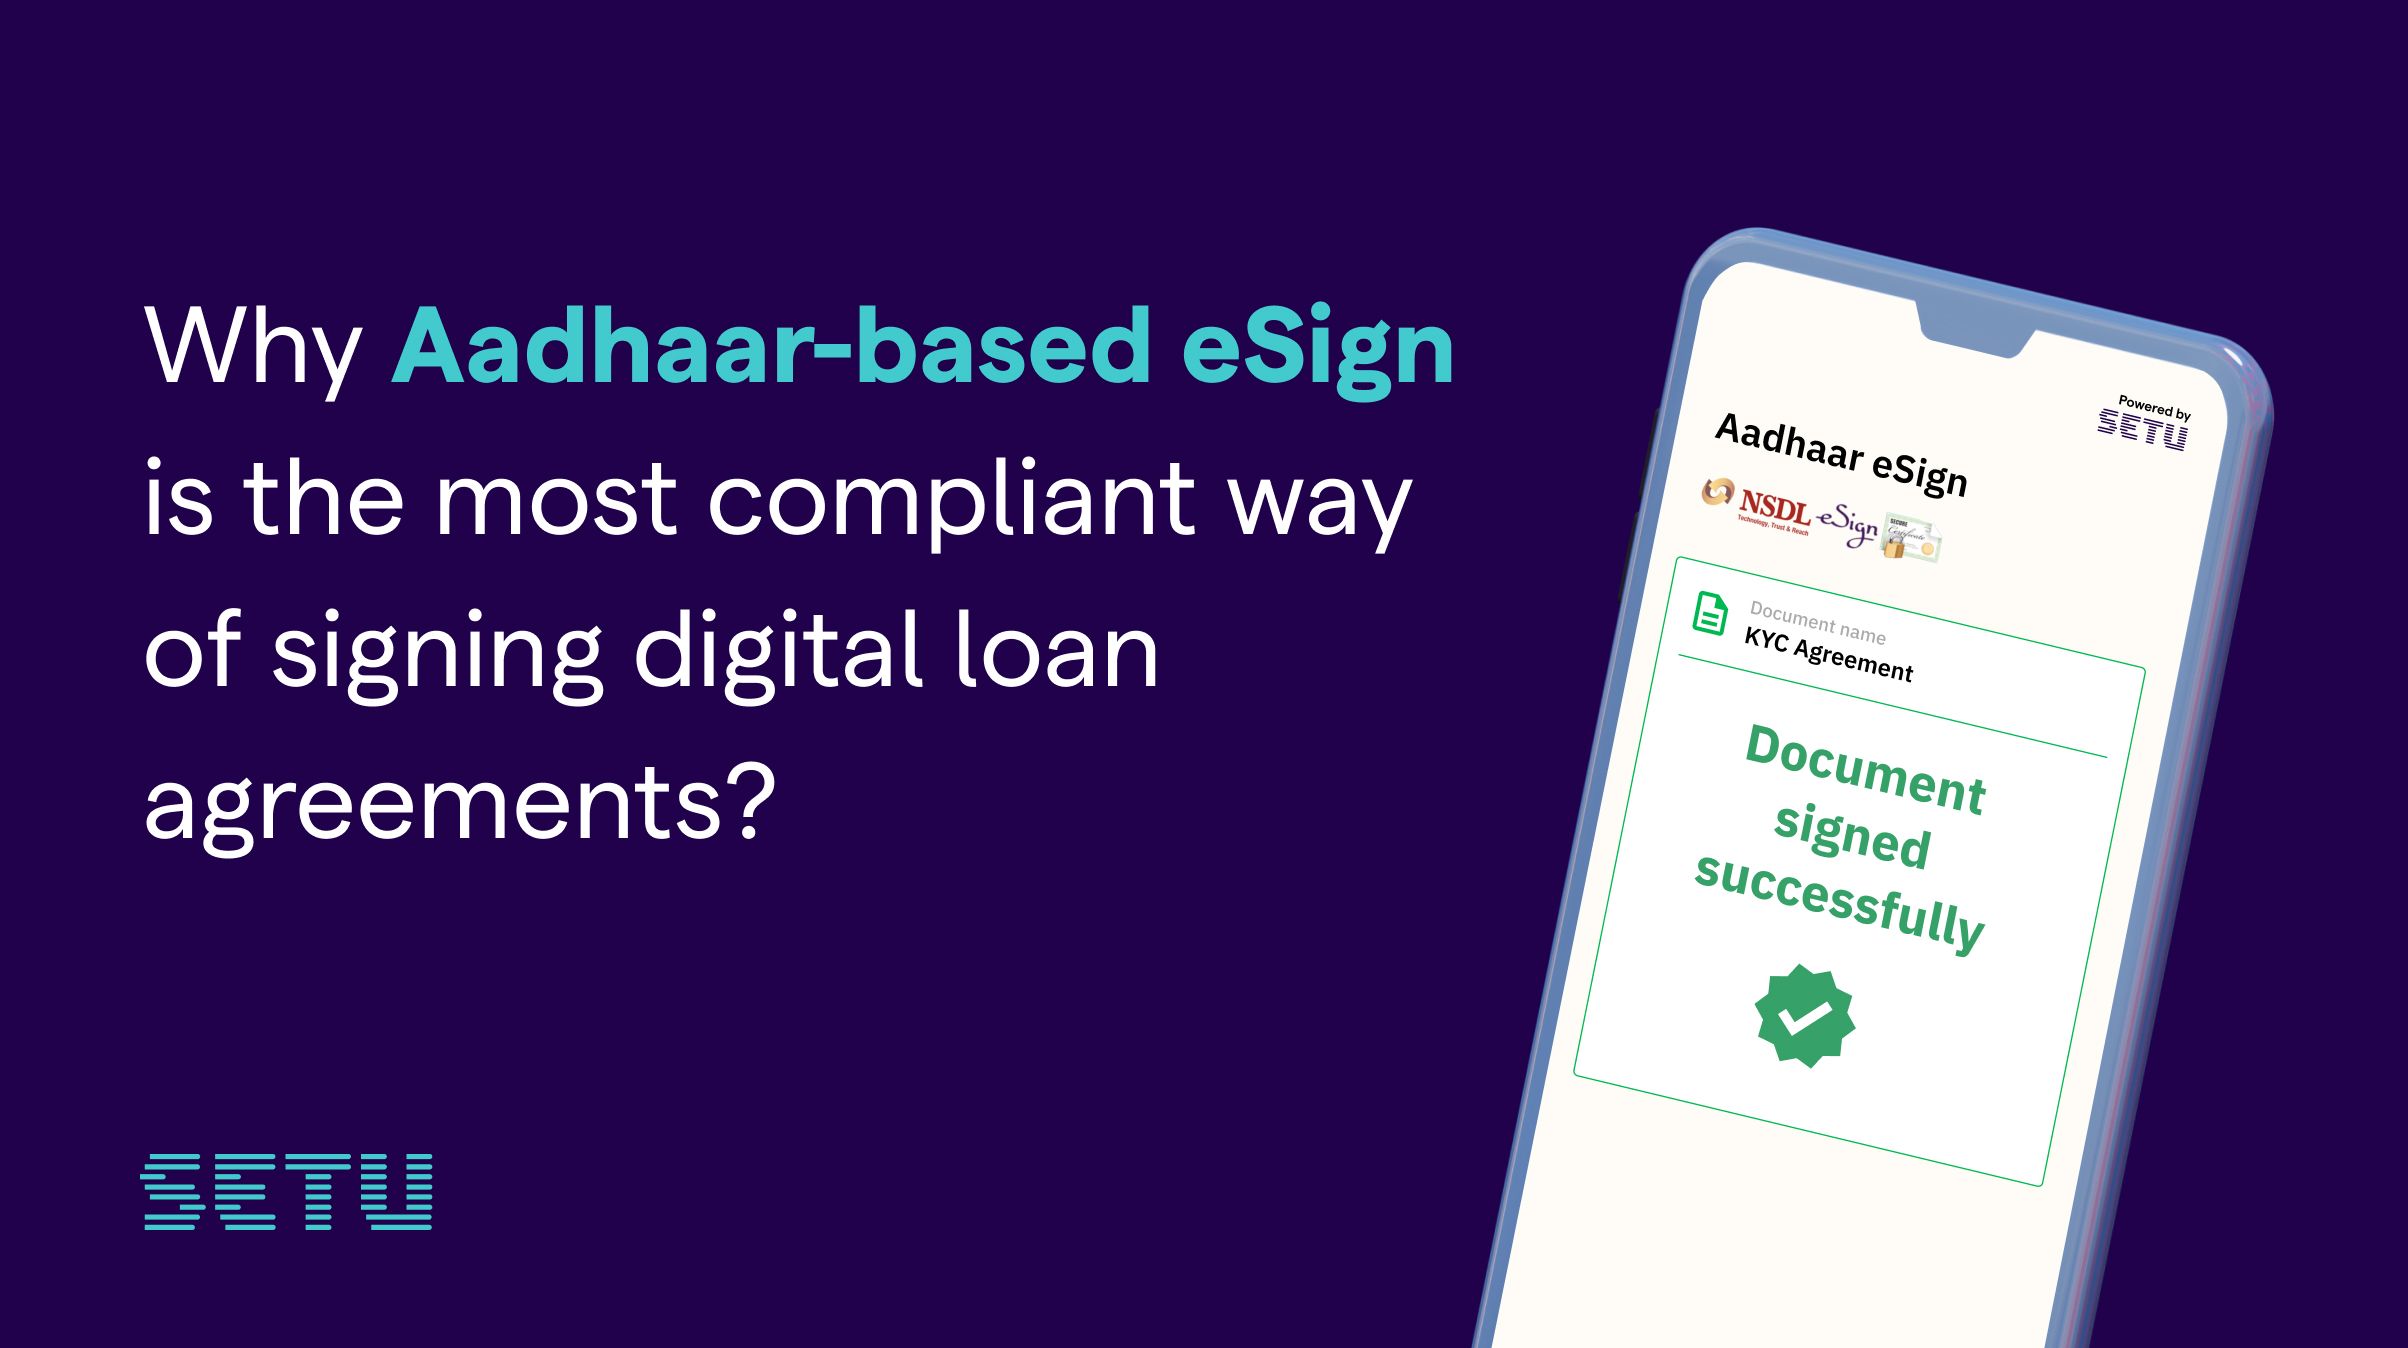 Why Aadhaar-based eSign is the most compliant way of signing digital loan agreements? title image